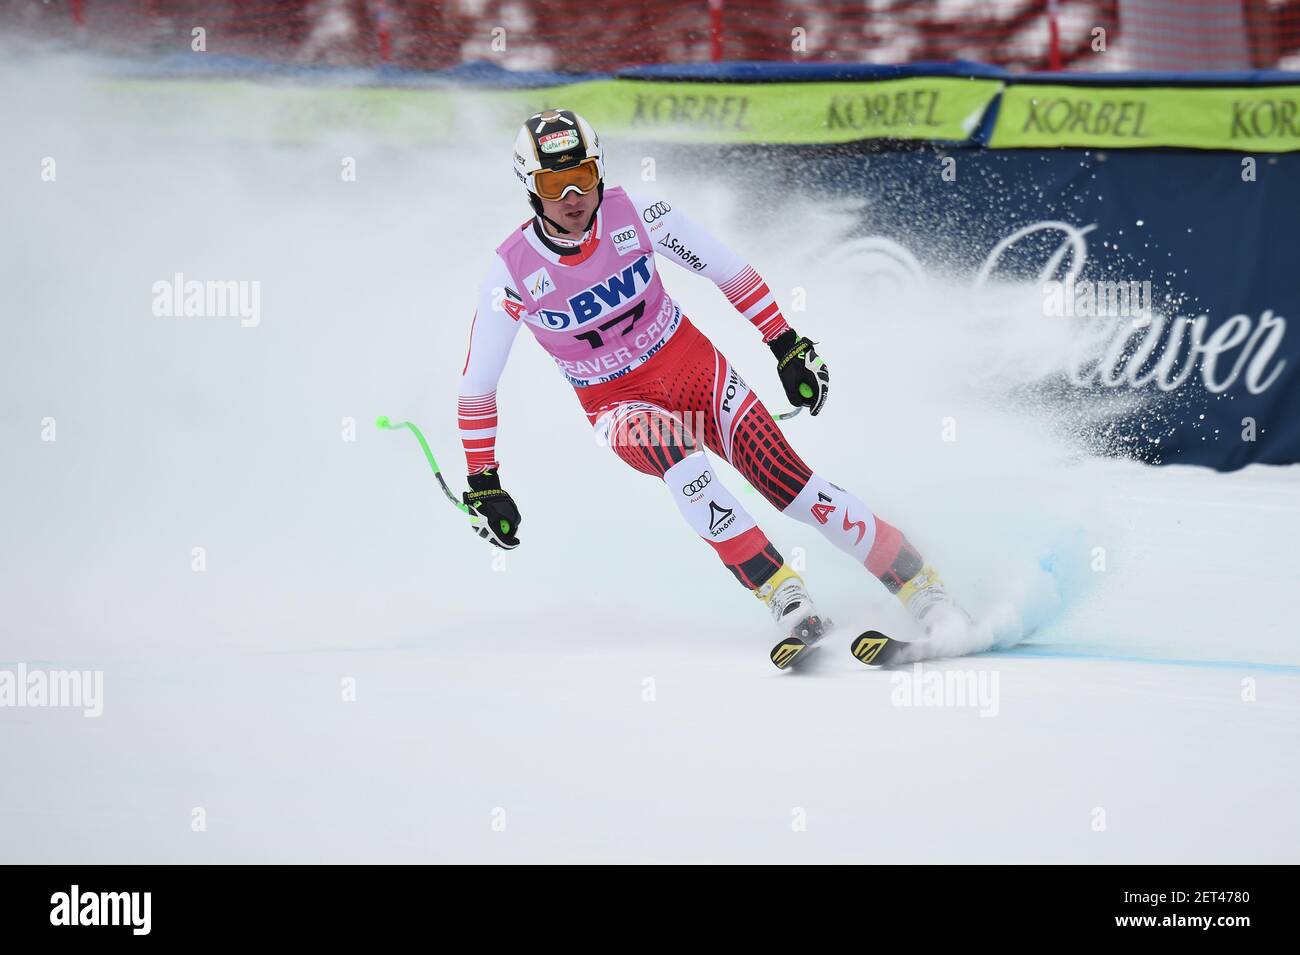 Nov 30, 2018; Avon, CO, USA; Hannes Reichelt of Austria finishes the men's  downhill in the 2018 FIS Birds of Prey alpine skiing world cup at Beaver  Creek. Mandatory Credit: Michael Madrid-USA